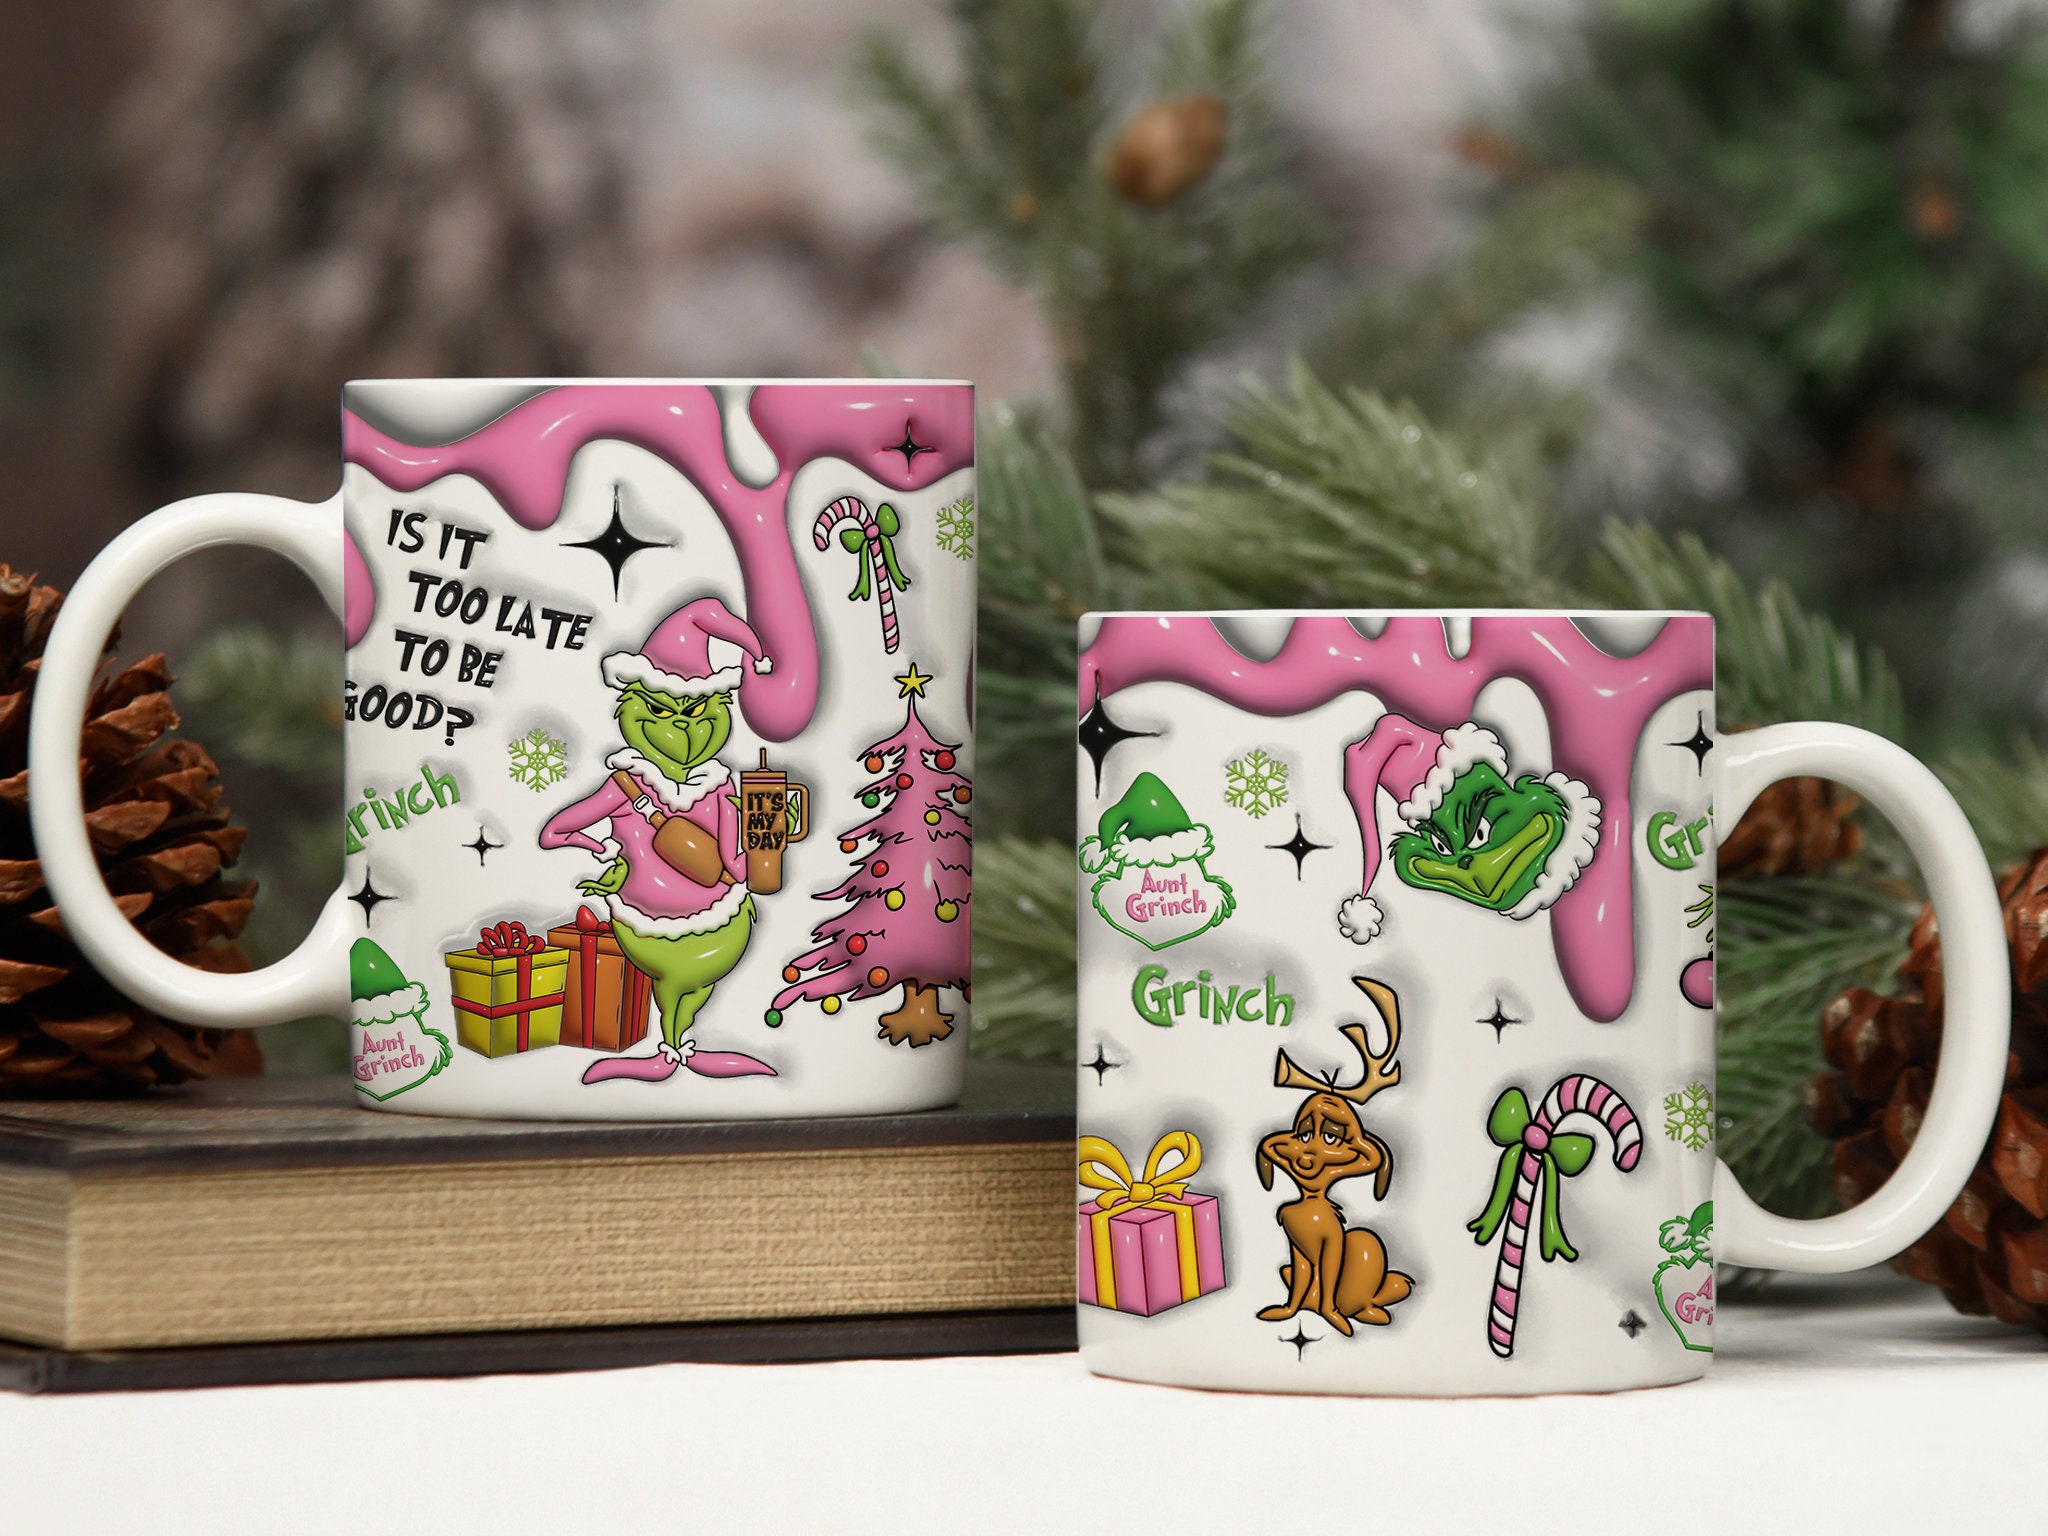 Ship from China RTS the grinch cups with green handle 25pcs - GGblanks